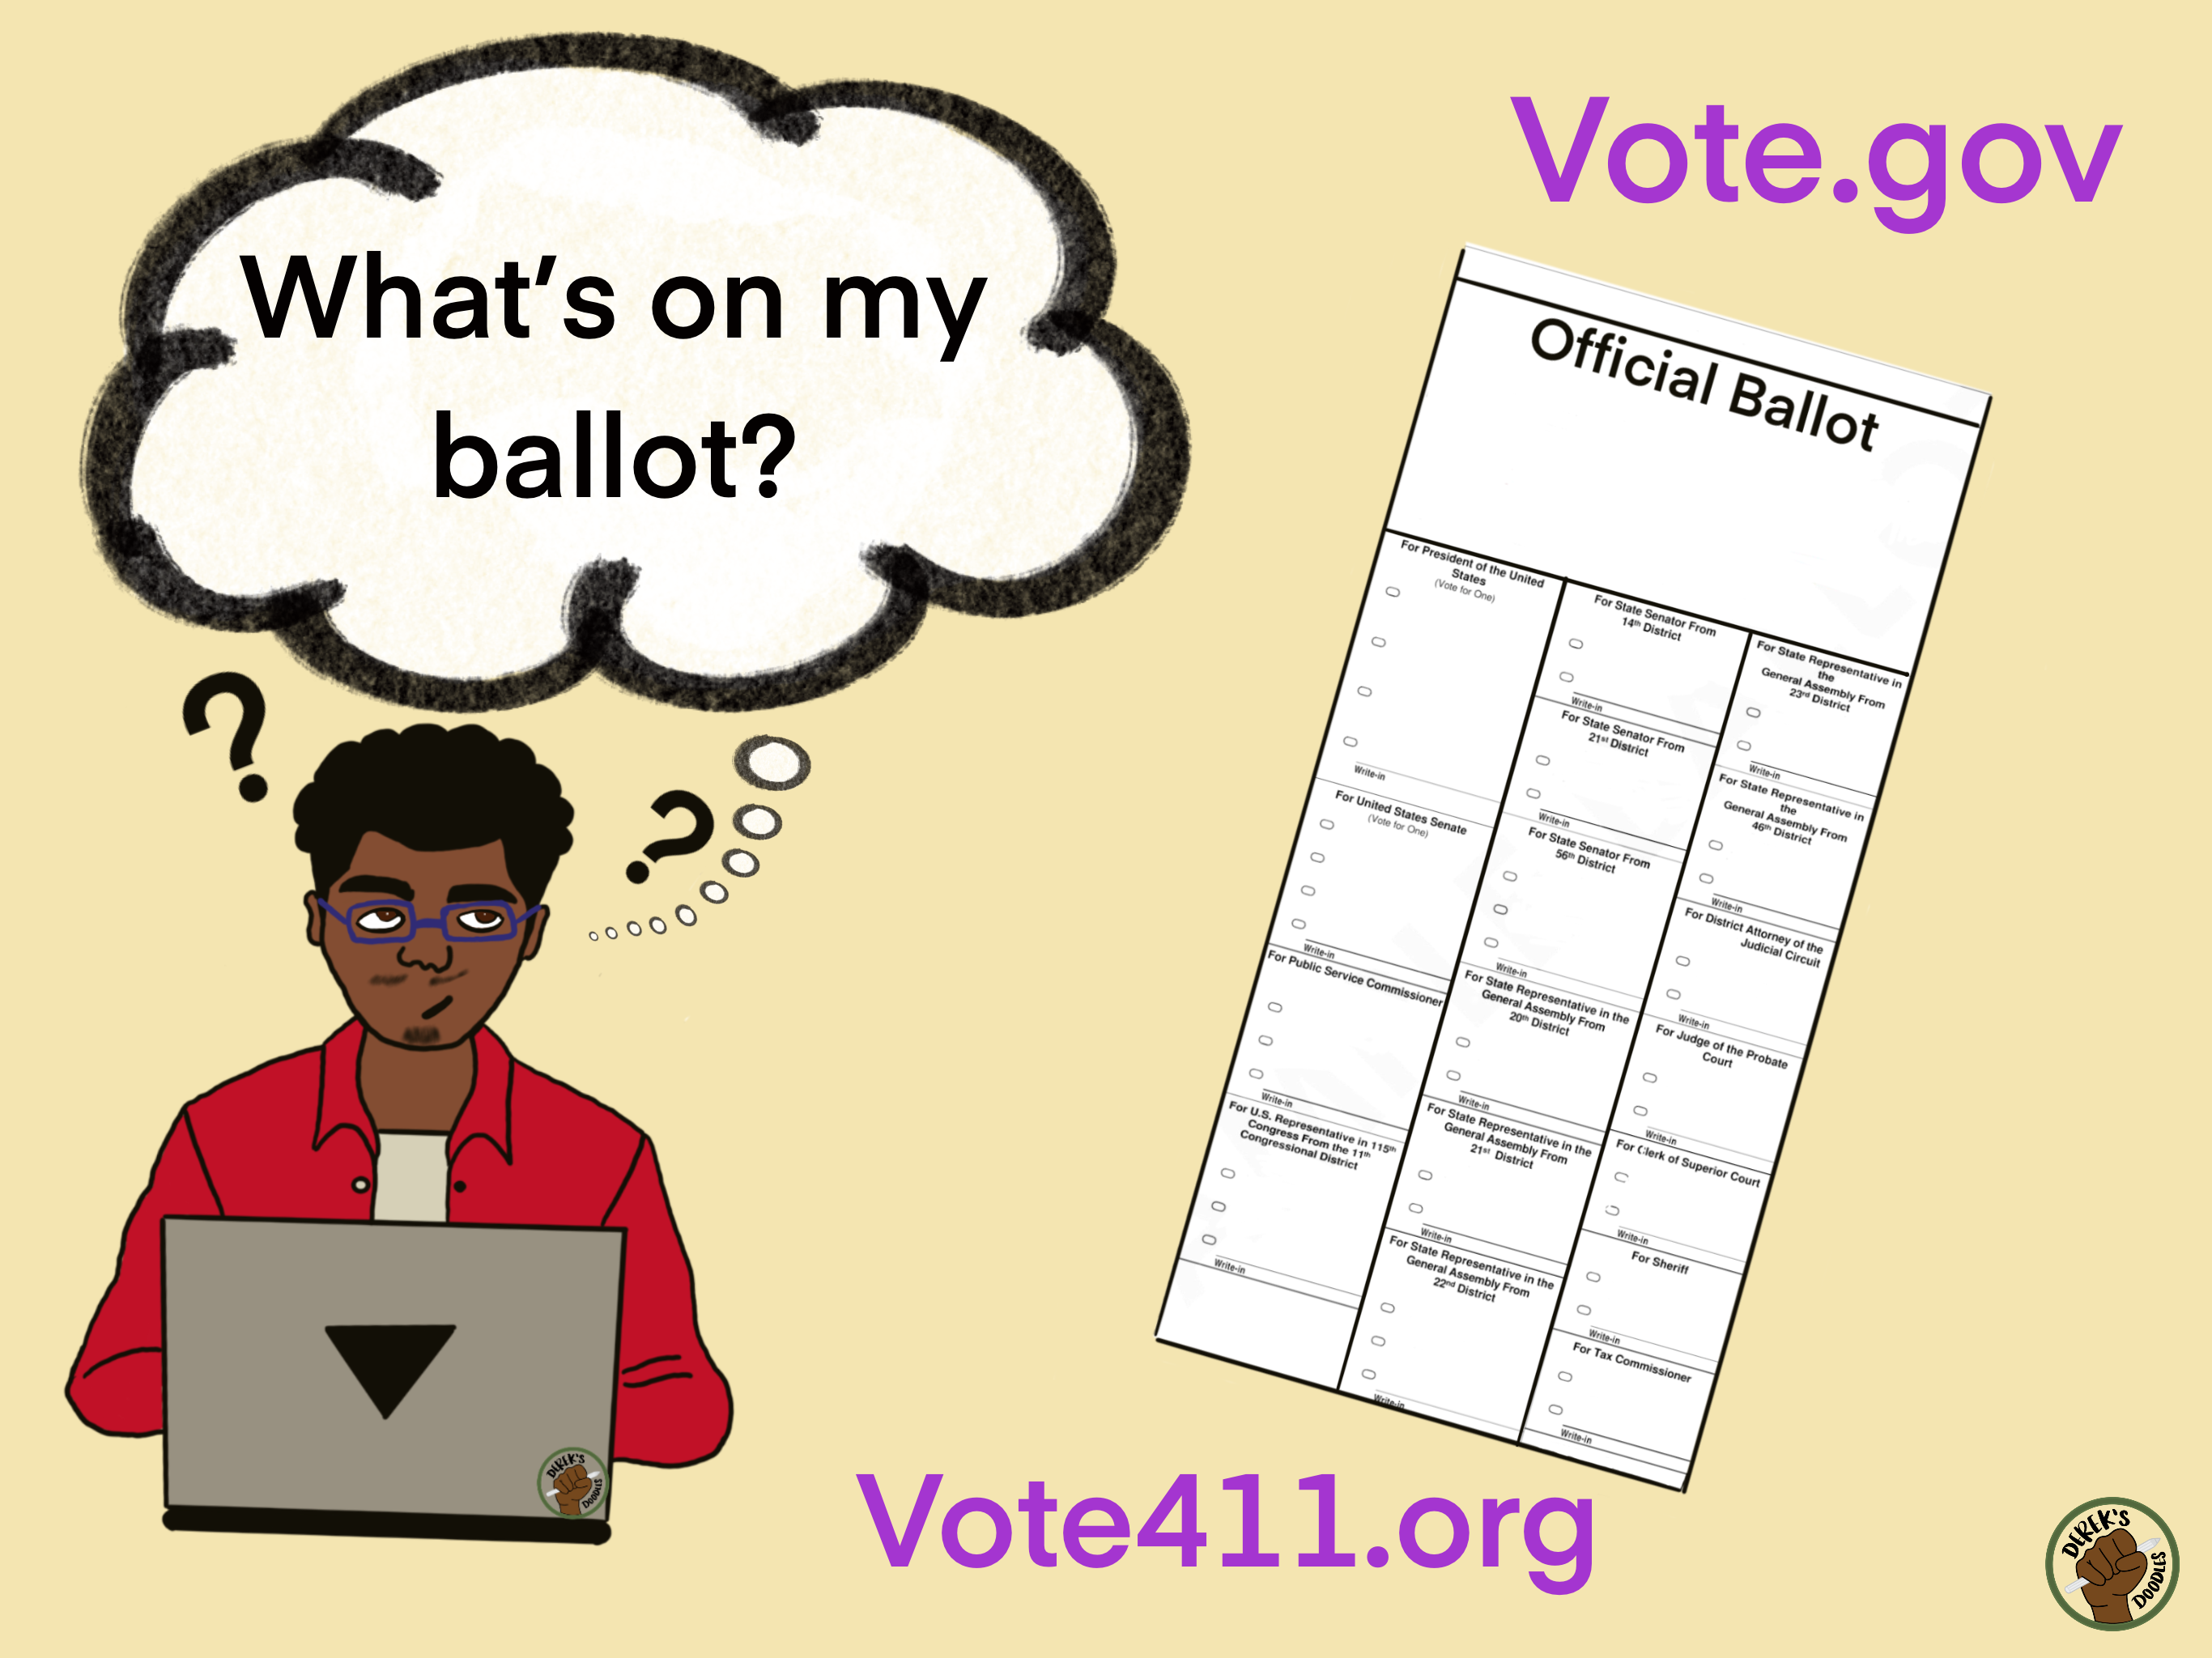 A cartoon of a black man sitting in front of a laptop. He has blue glasses and a red button-up shirt. His mouth is twisted and eyes are looking up as if he is in deep thought. There are question marks around his head and a thought bubble says, “What’s on my ballot?” Next to him is a picture of an “official ballot” with lots of questions on it. The graphic has two websites on it: Vote.gov and Vote411.org. In the bottom right corner is the logo for Derek’s Doodles.